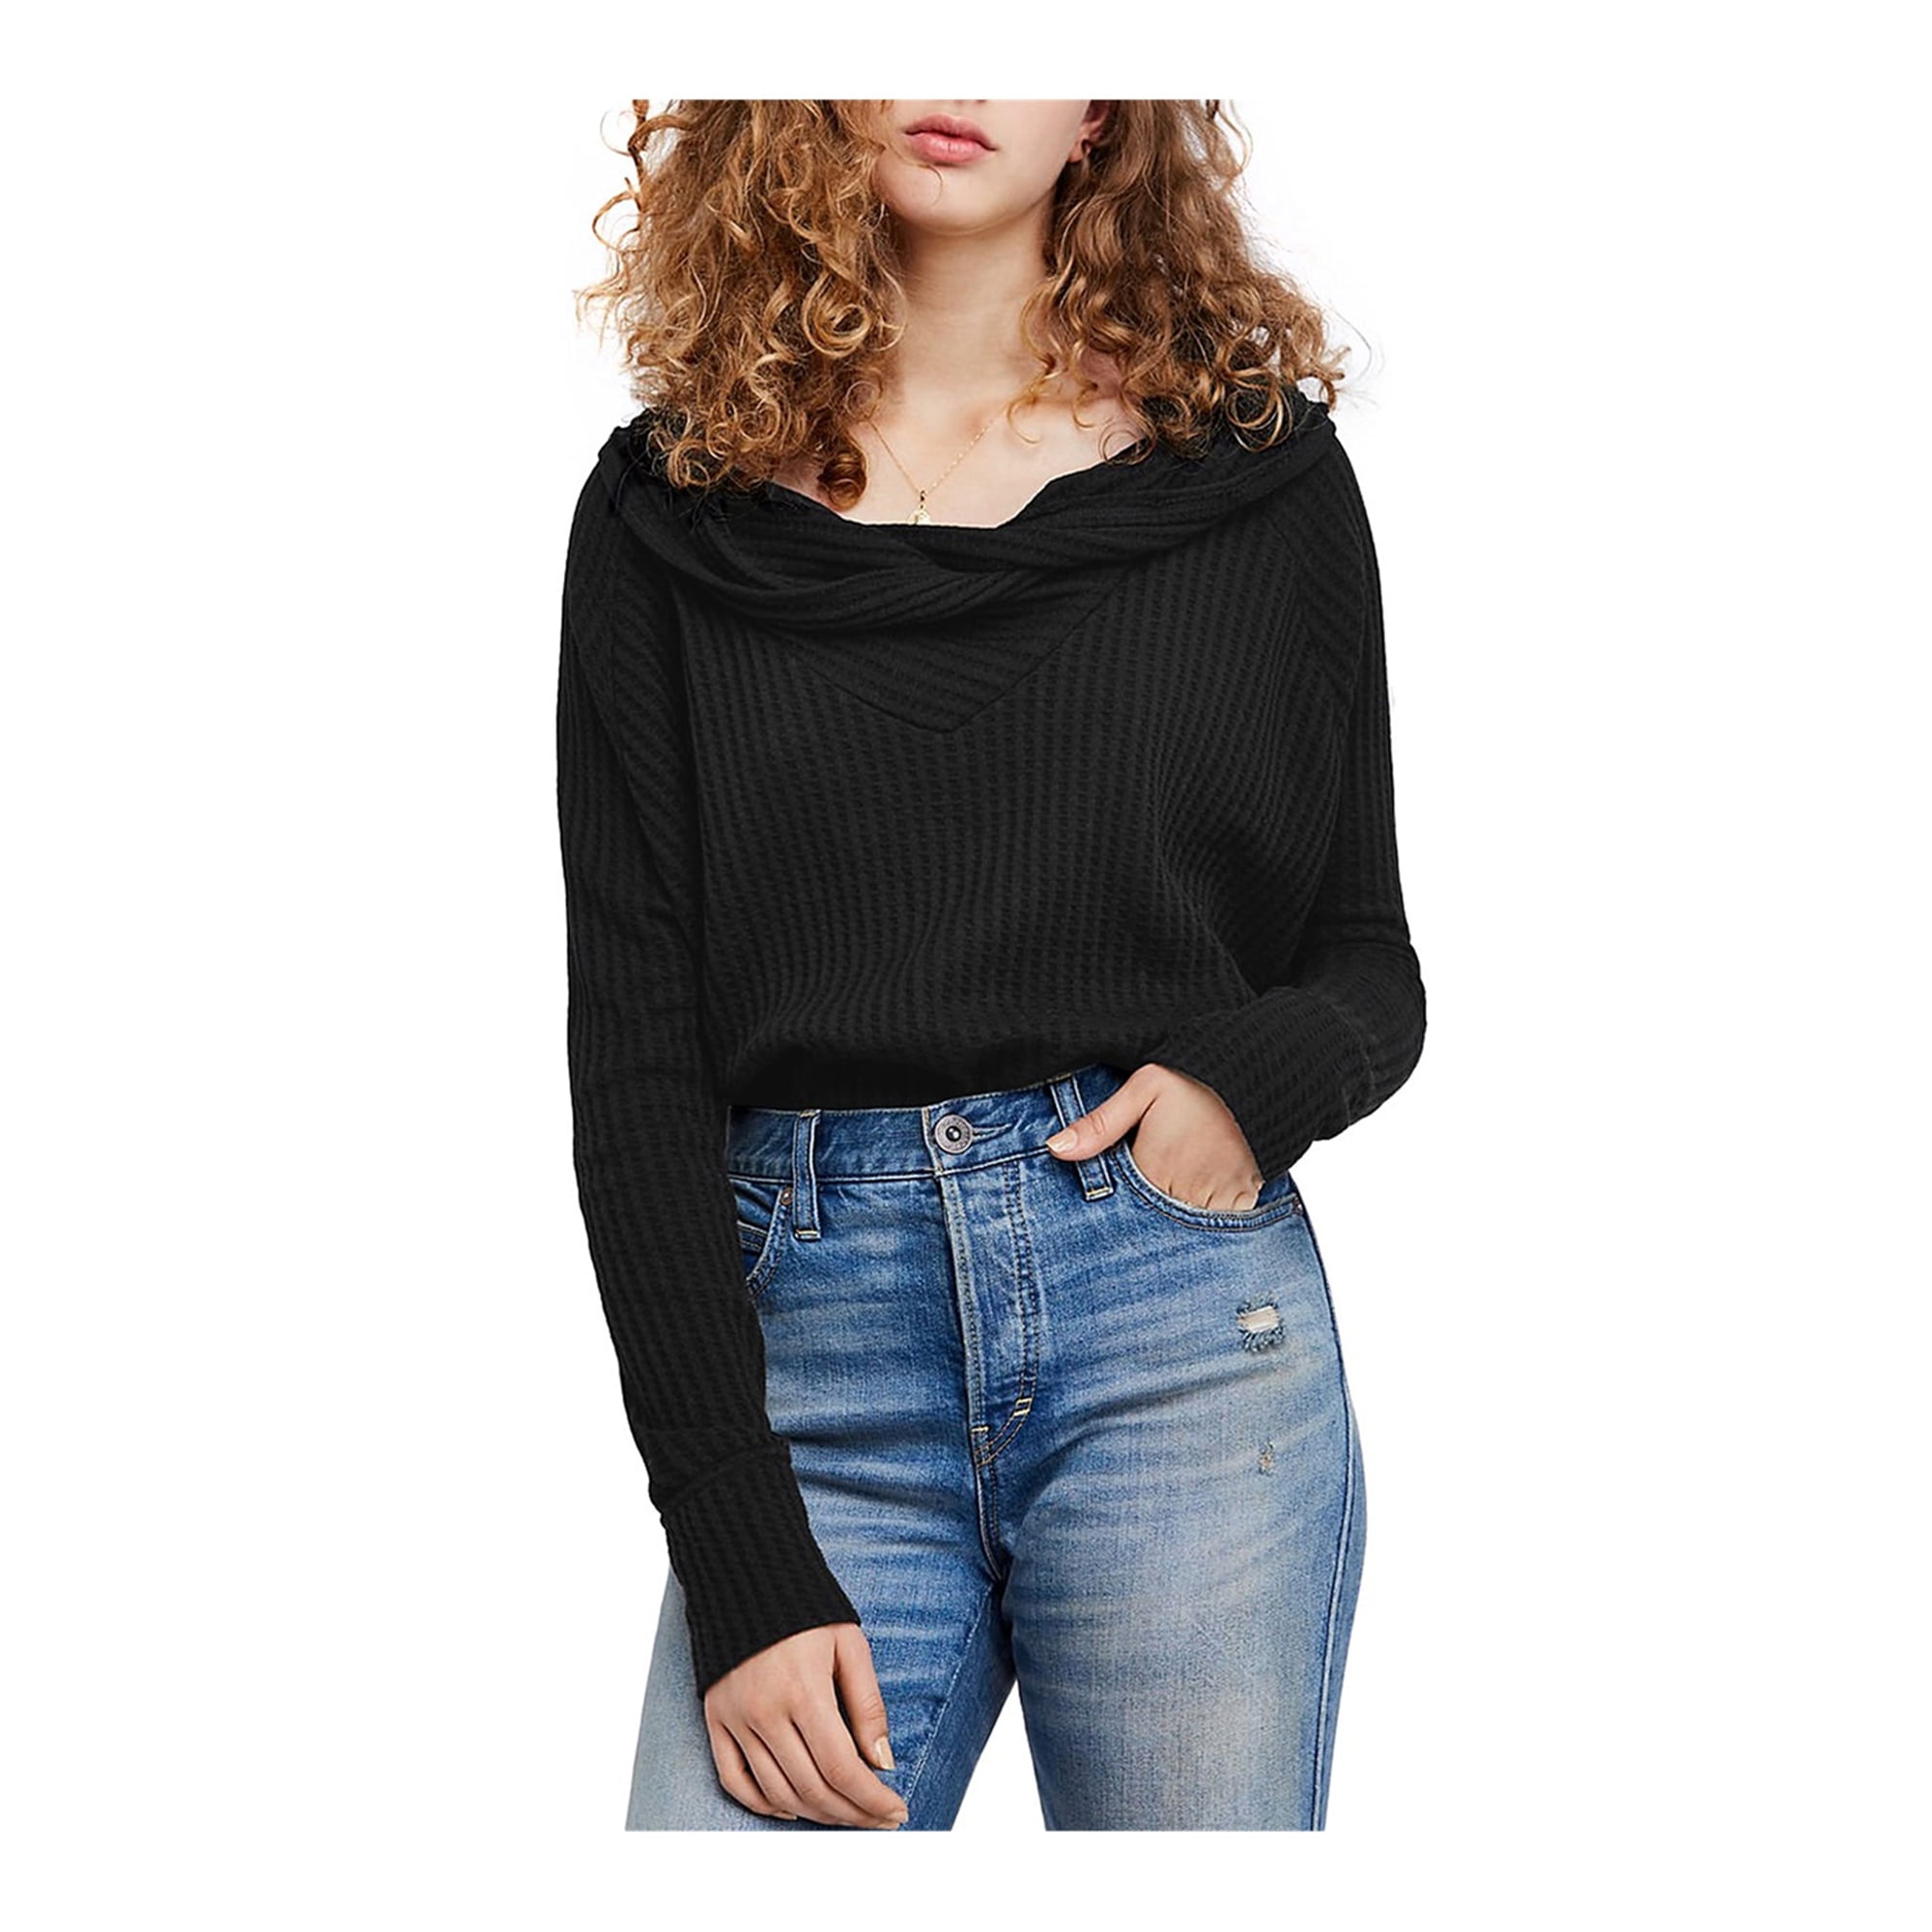 Free People Womens Wide Neck Thermal Sweater, Black, X-Small - Walmart.com